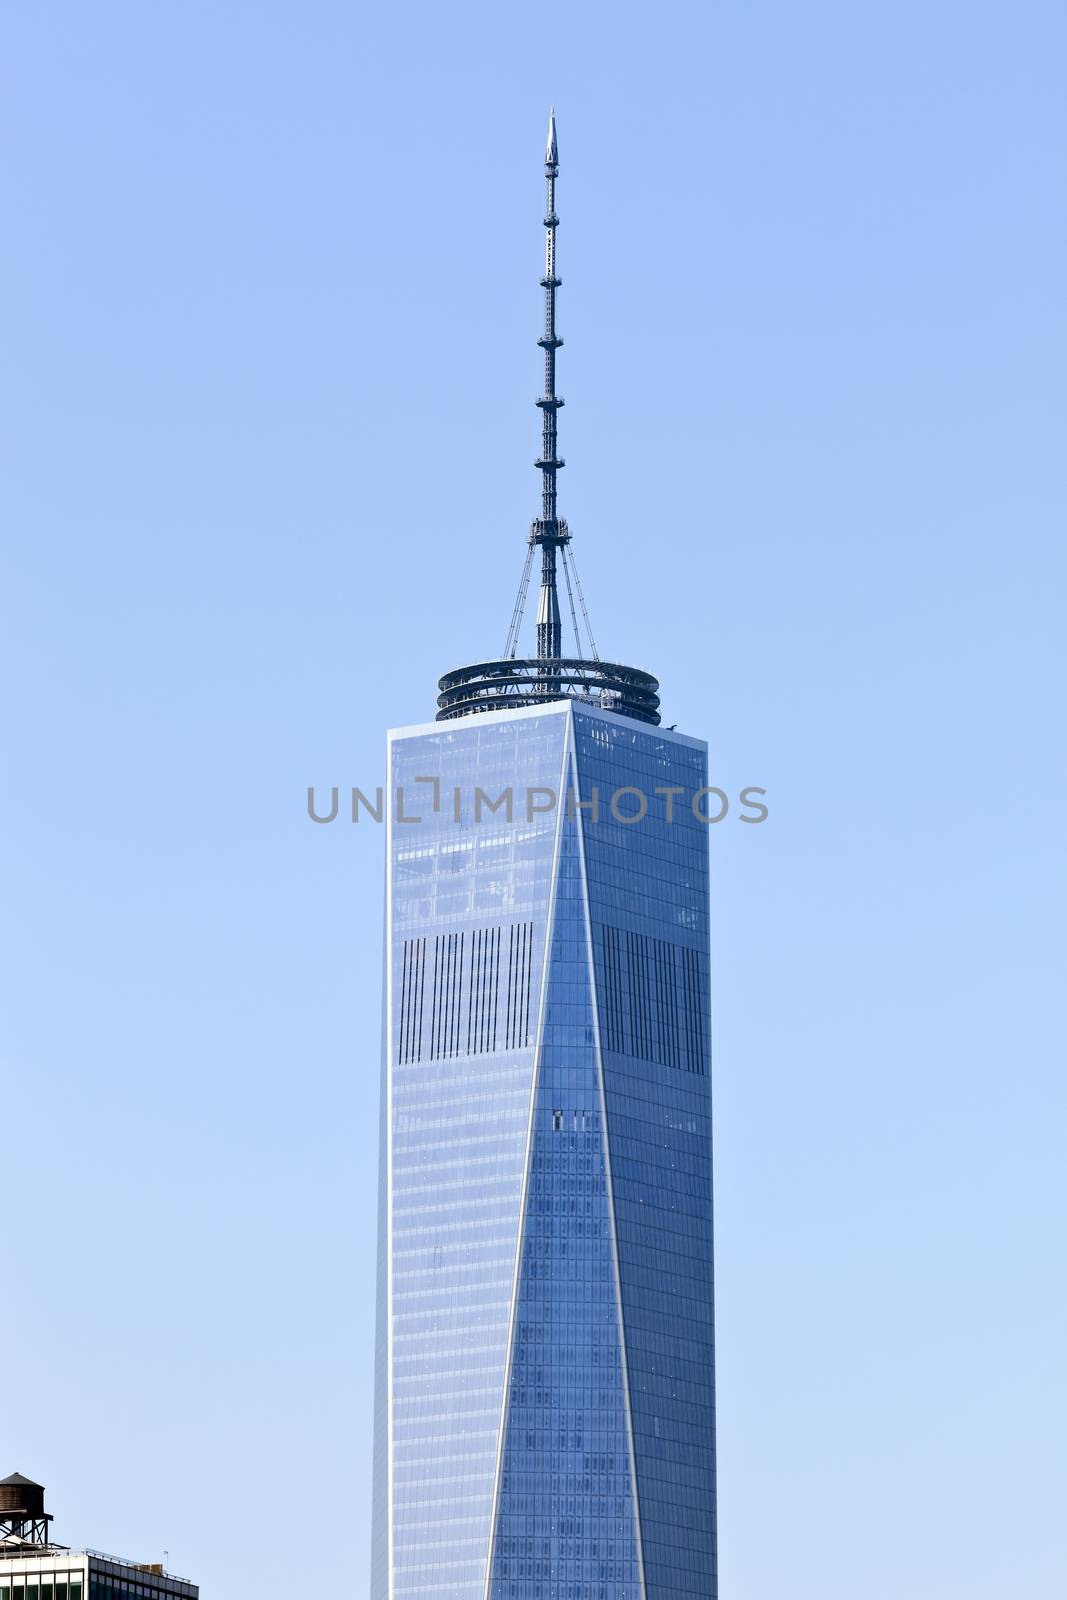 New York, USA, October 3, 2014: The top of the Freedom Tower with 408 feet (124 m) mast containing the broadcasting antenna gave the tower symbolic height of 1,776 feet (541 m)